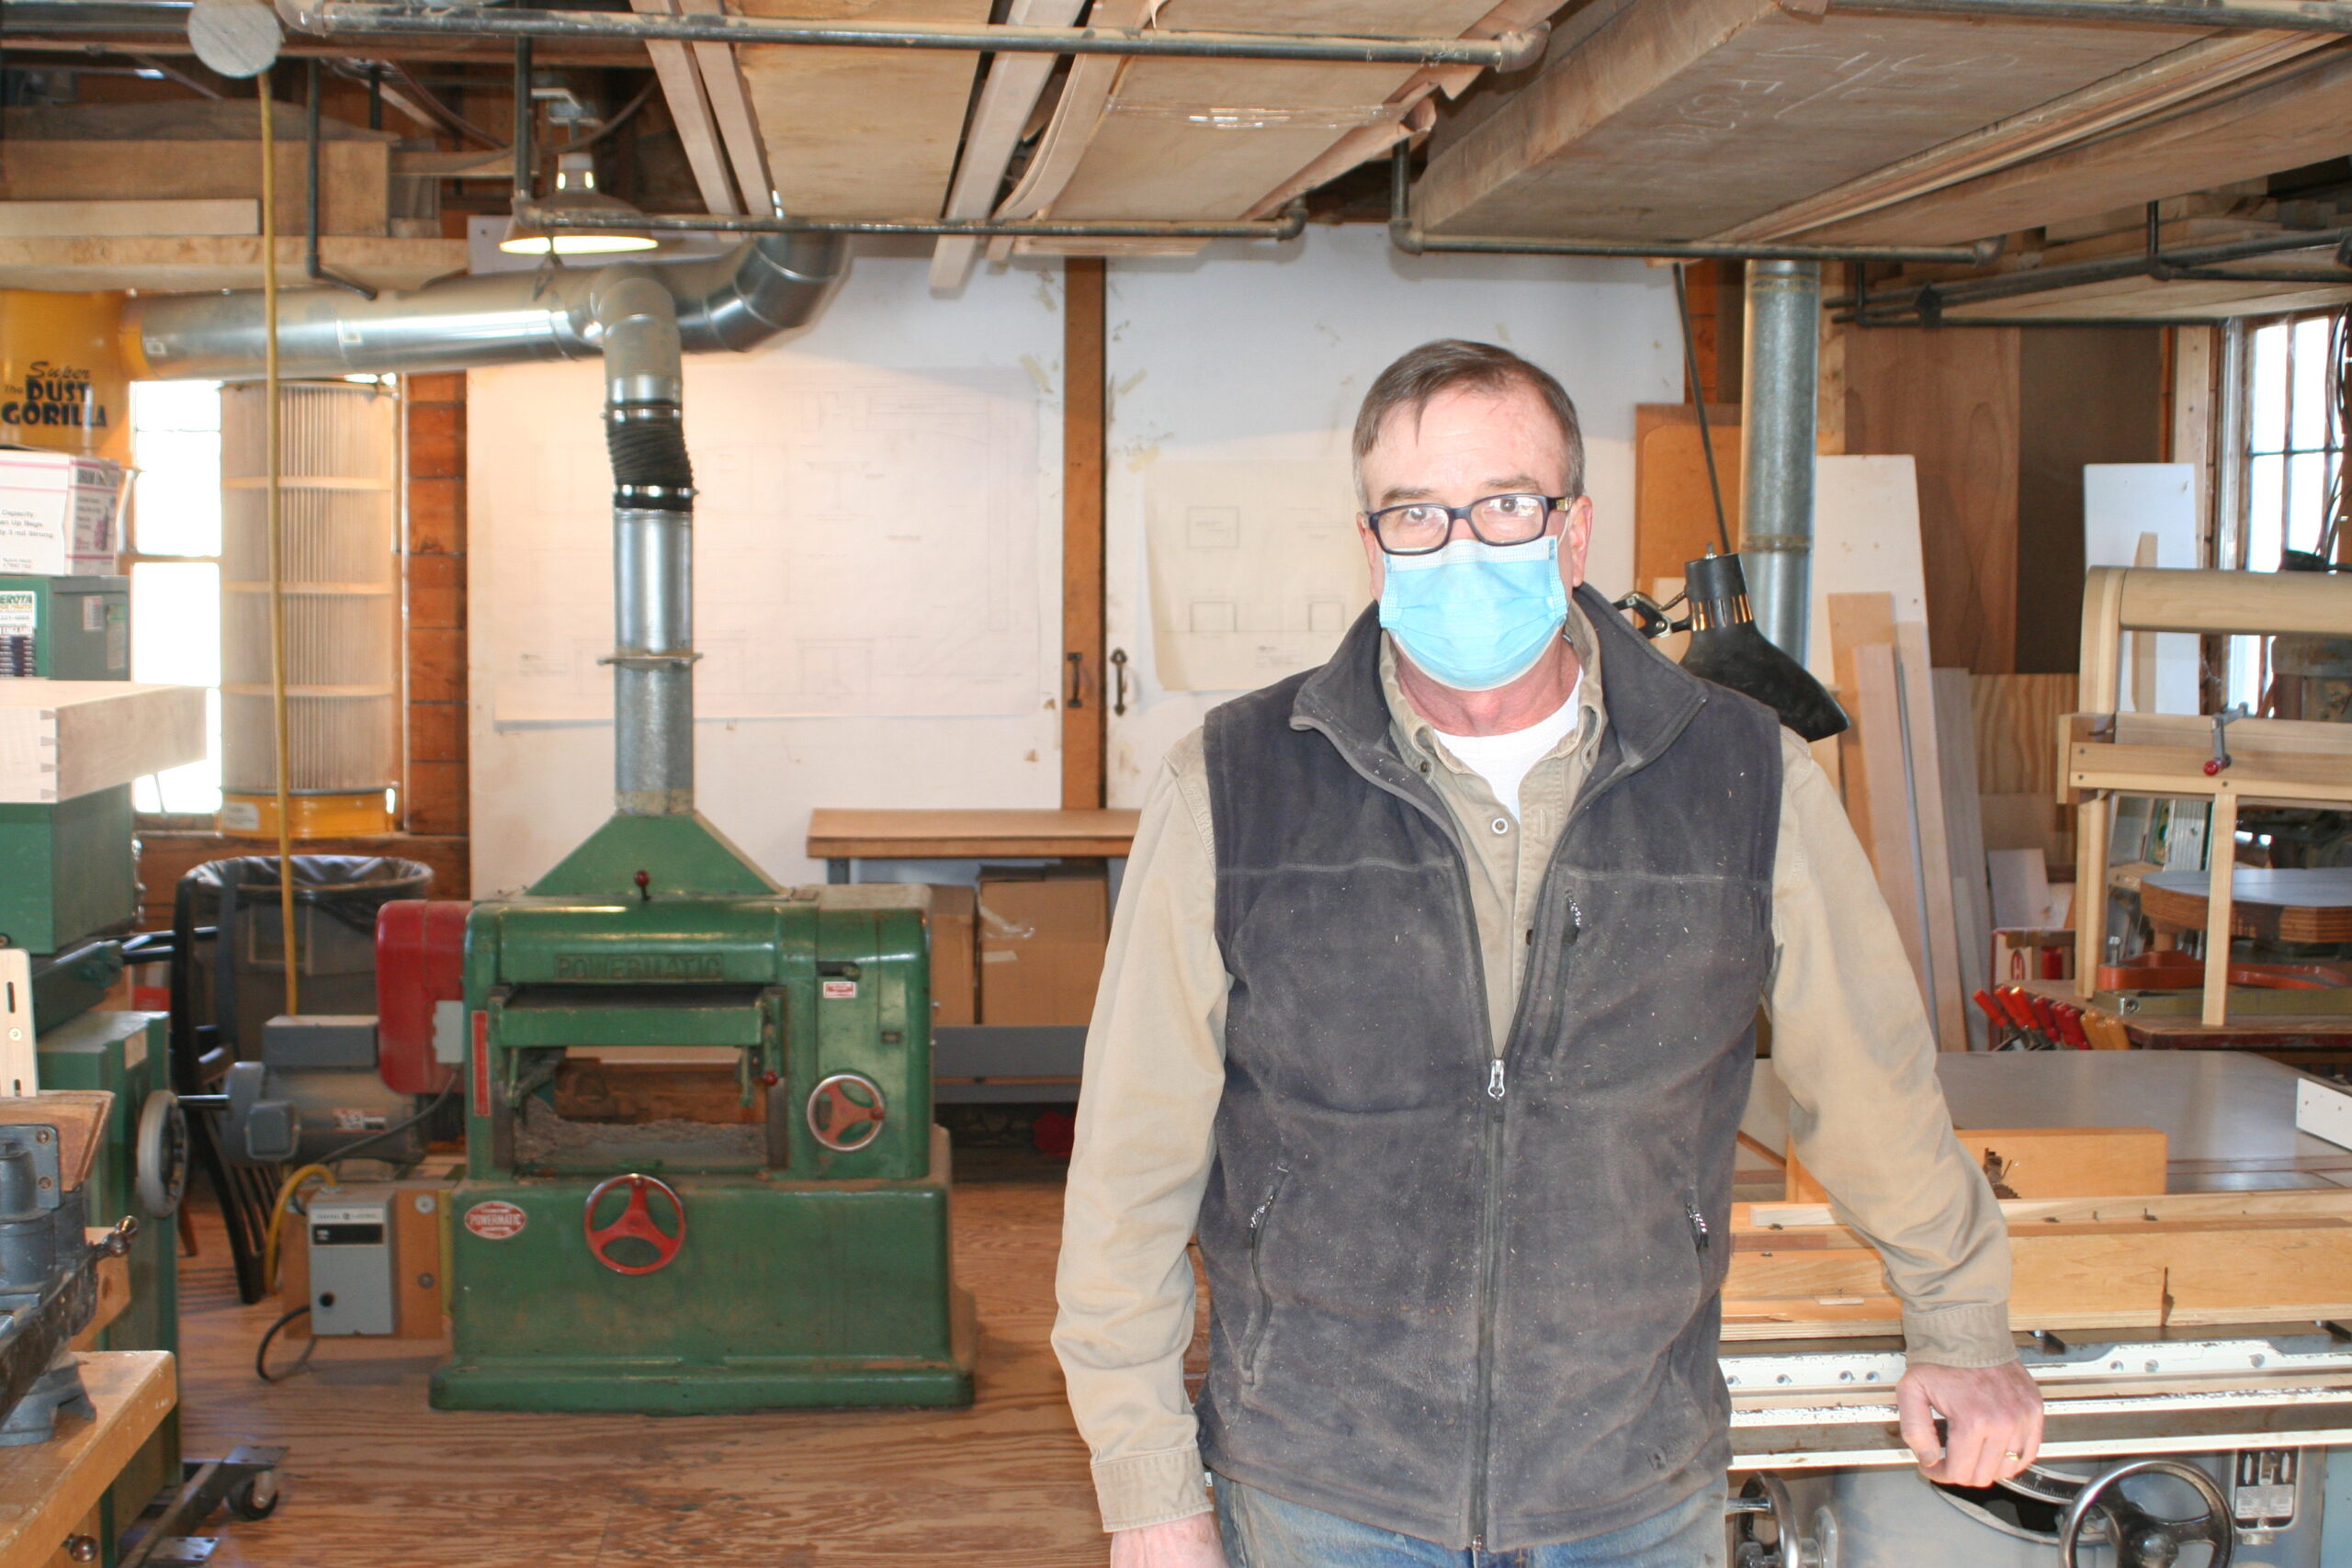 Wood if he could: Local furniture builder takes on challenging projects